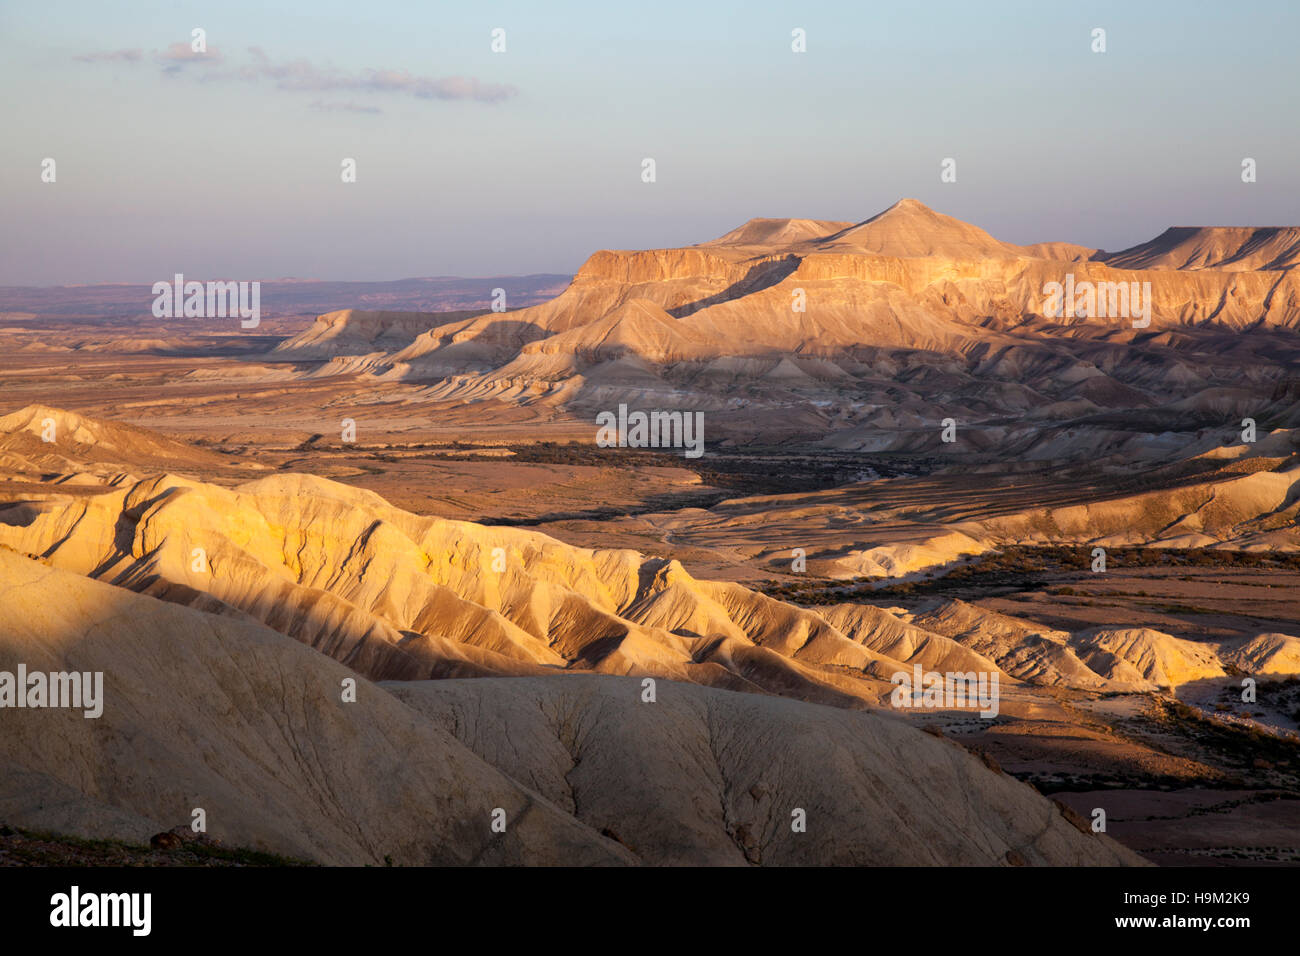 Nahal Israel High Resolution Stock Photography and Images - Alamy